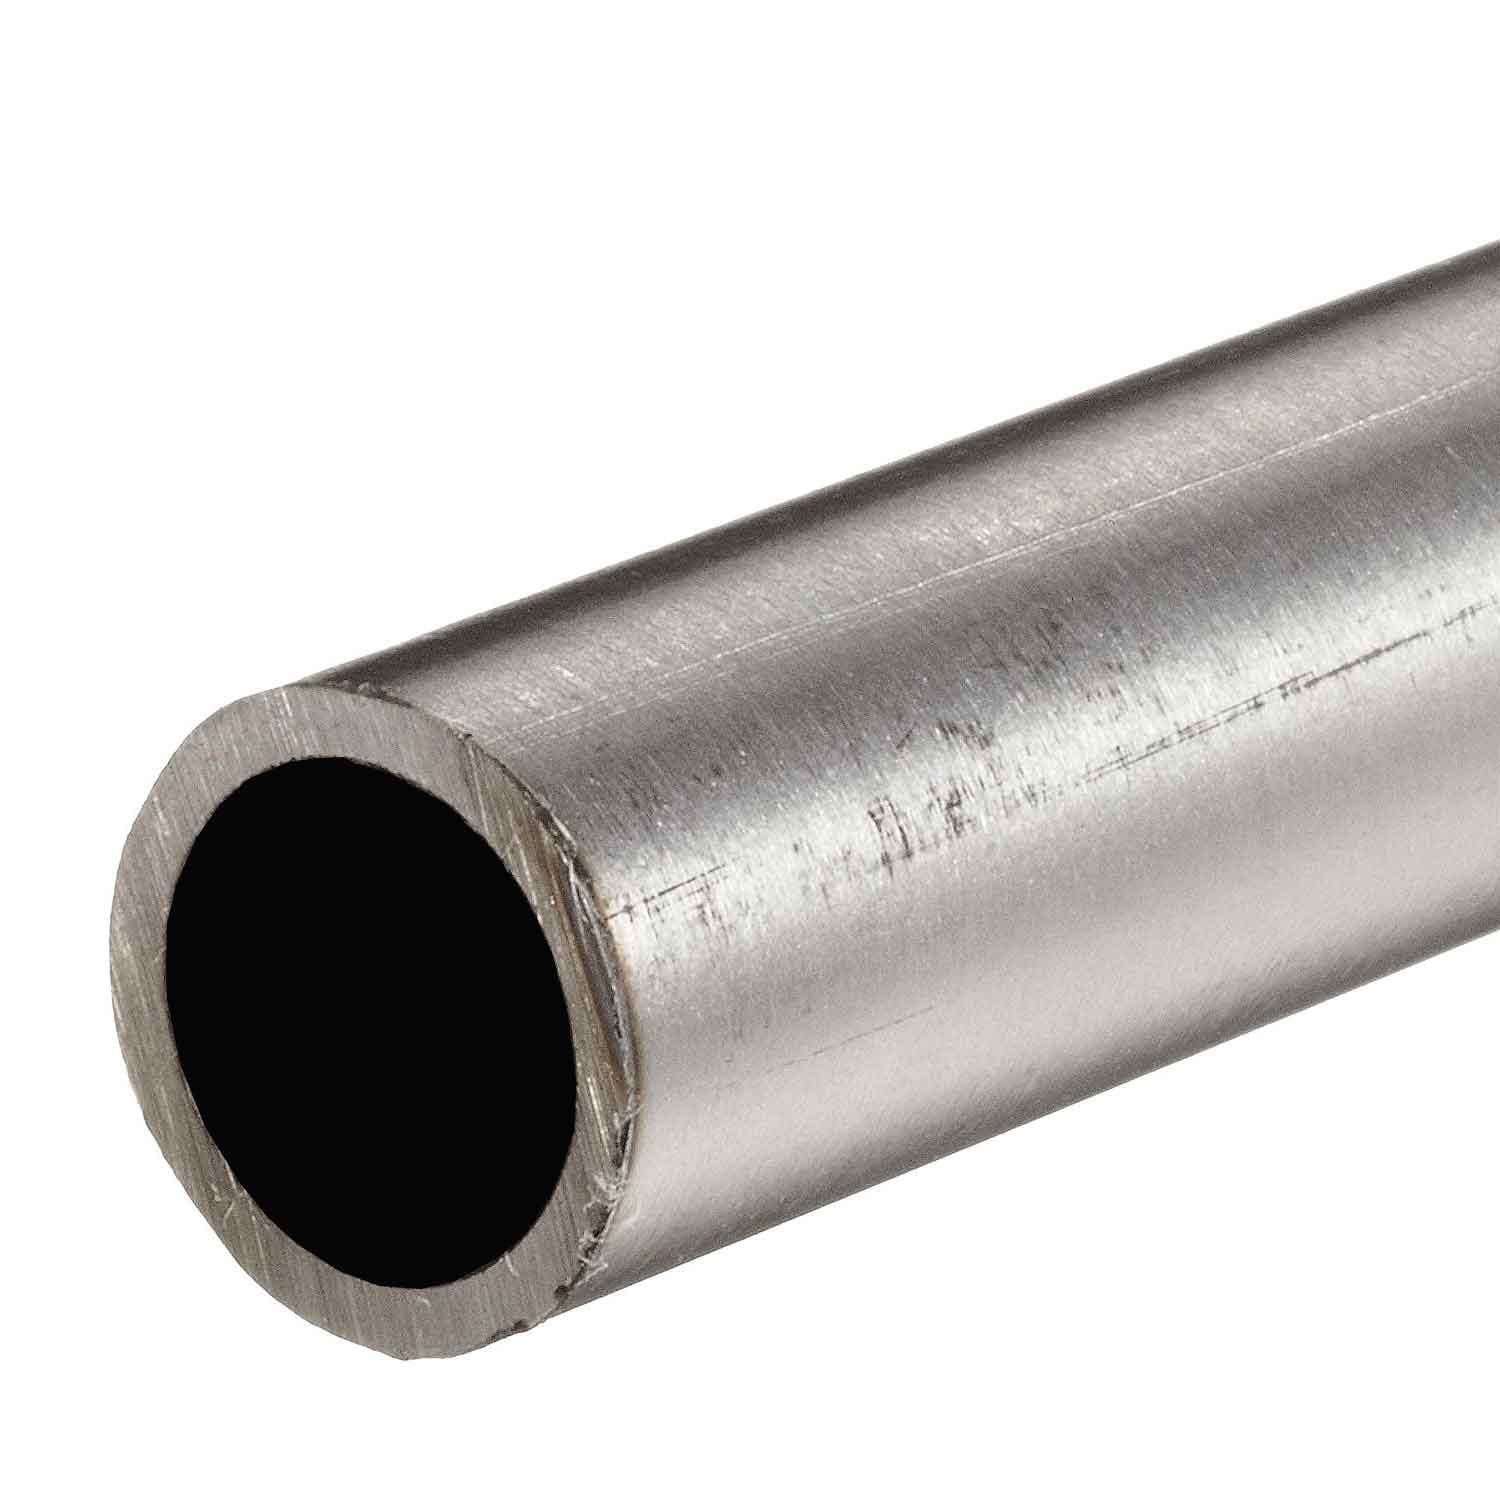 304 Stainless Steel, Round Tube, OD 1.500 (11/2 inch), Wall 0.250 inch, Length 12 inches